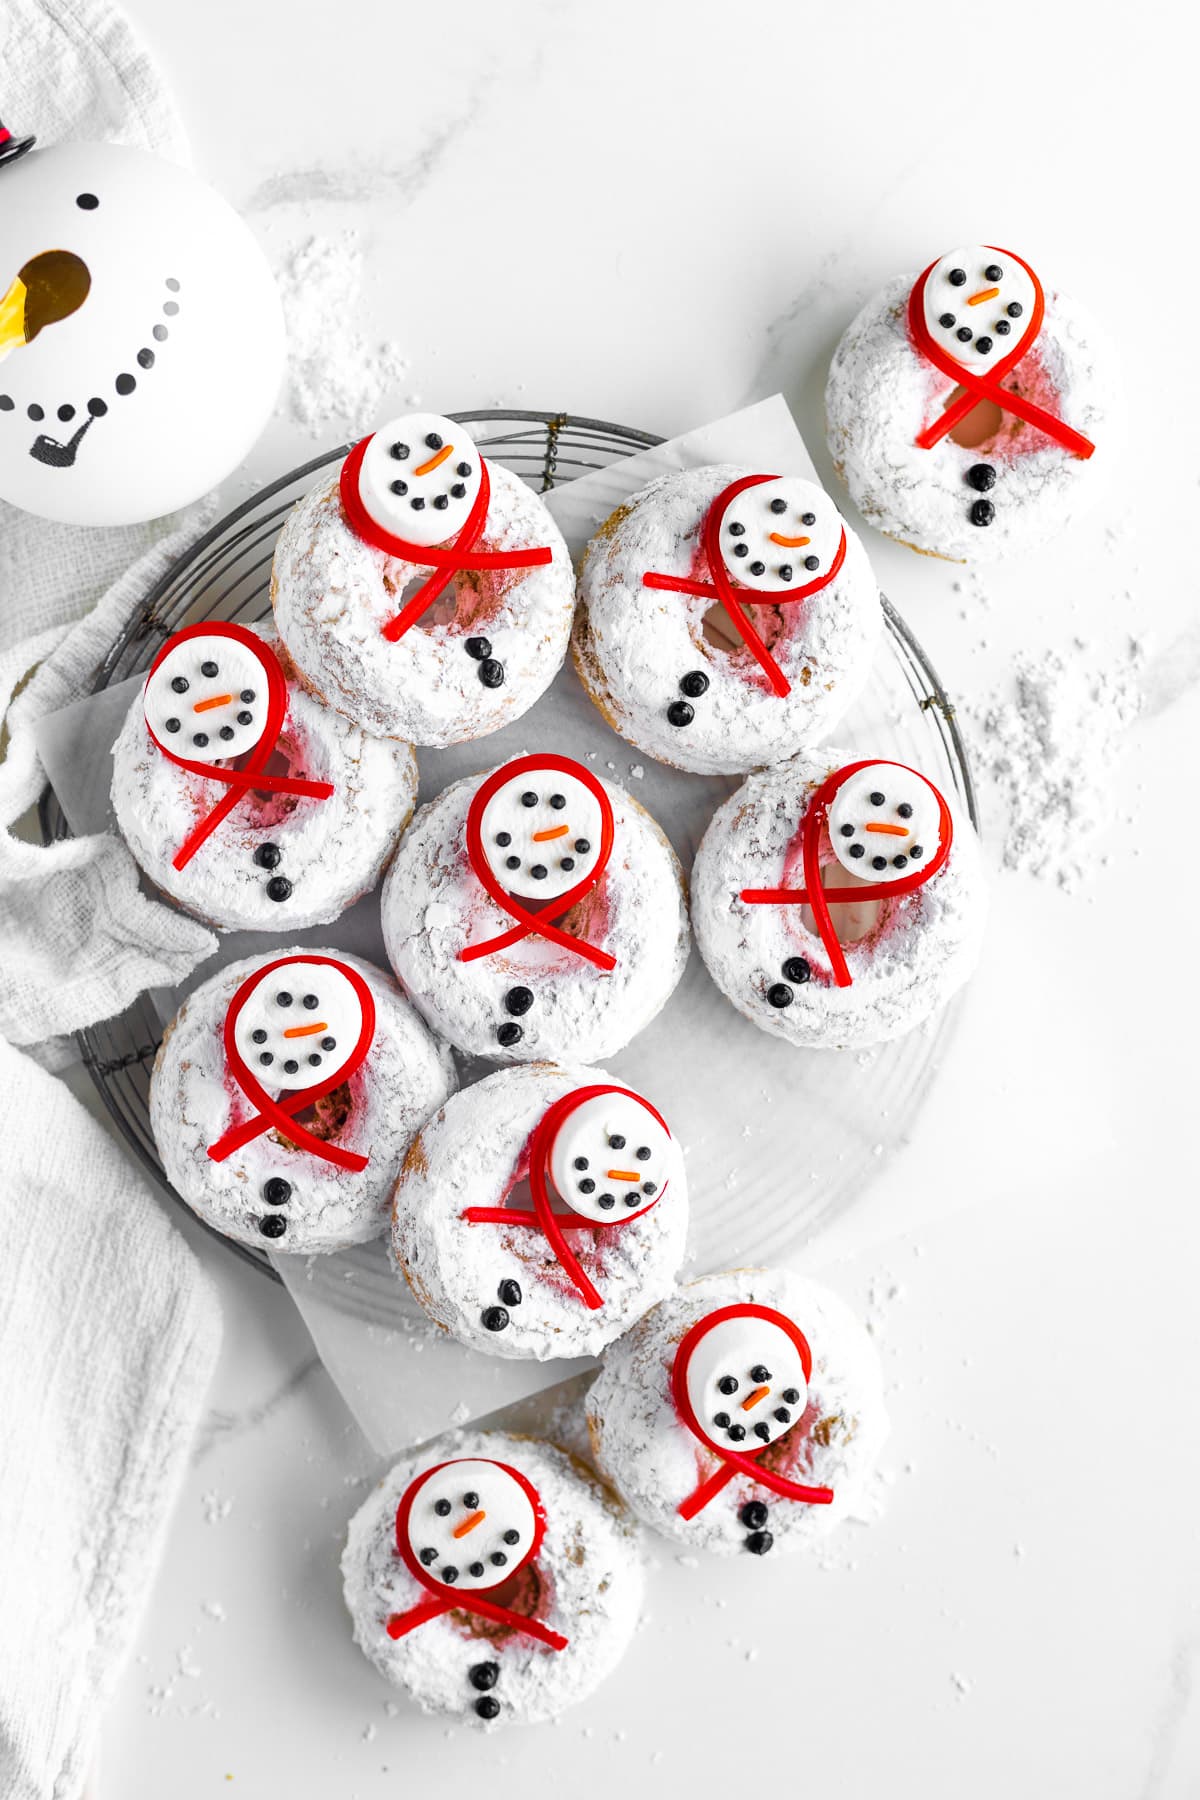 Decorated winter donuts on a wire rack.